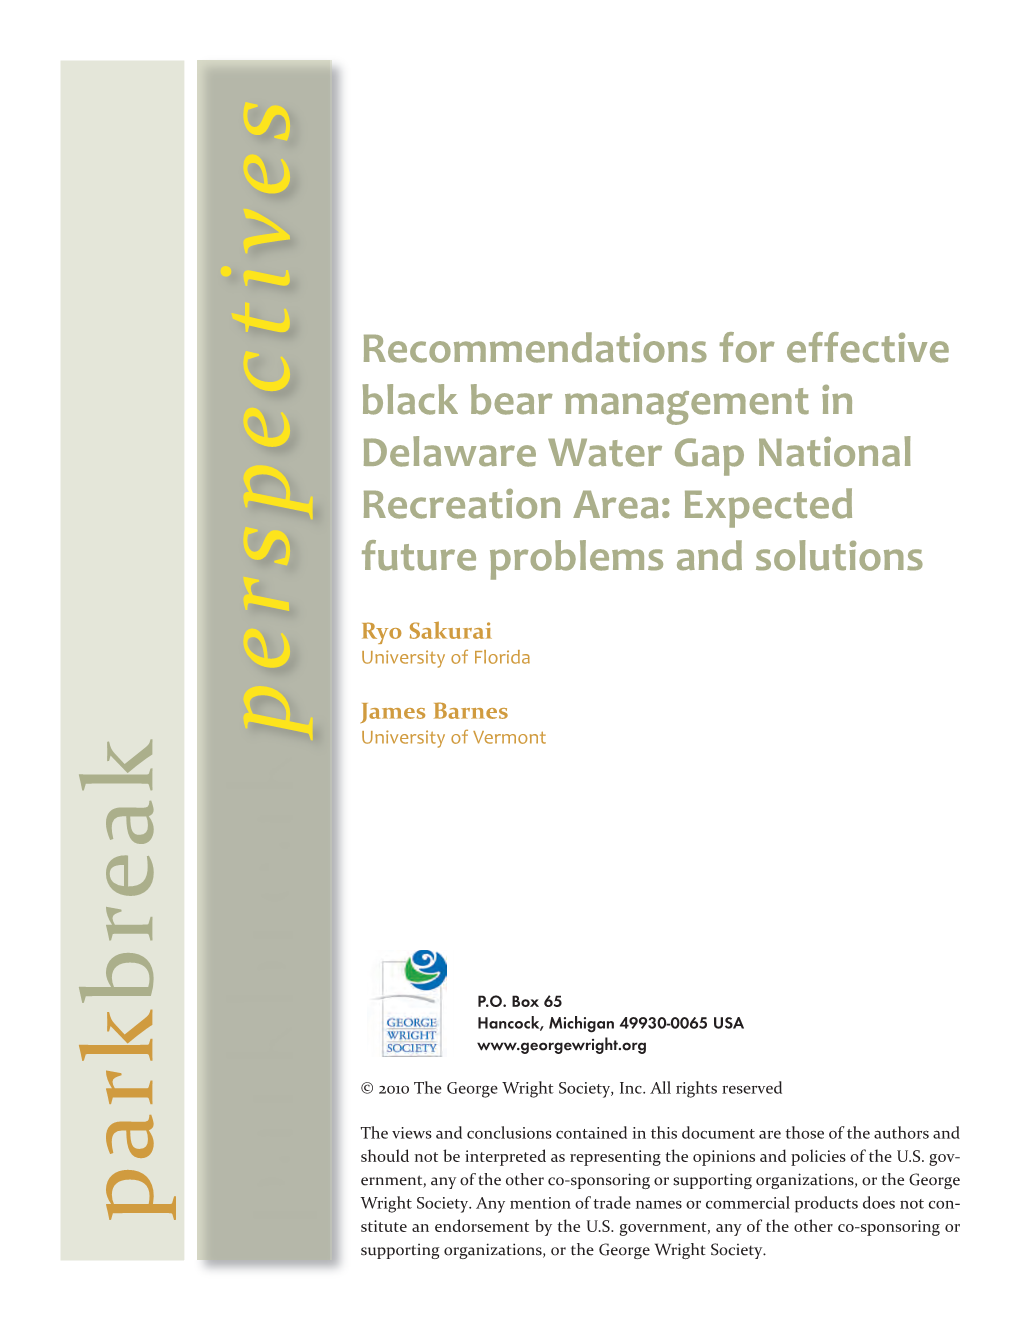 Recommendations for Effective Black Bear Management in Delaware Water Gap National Recreation Area: Expected Future Problems and Solutions